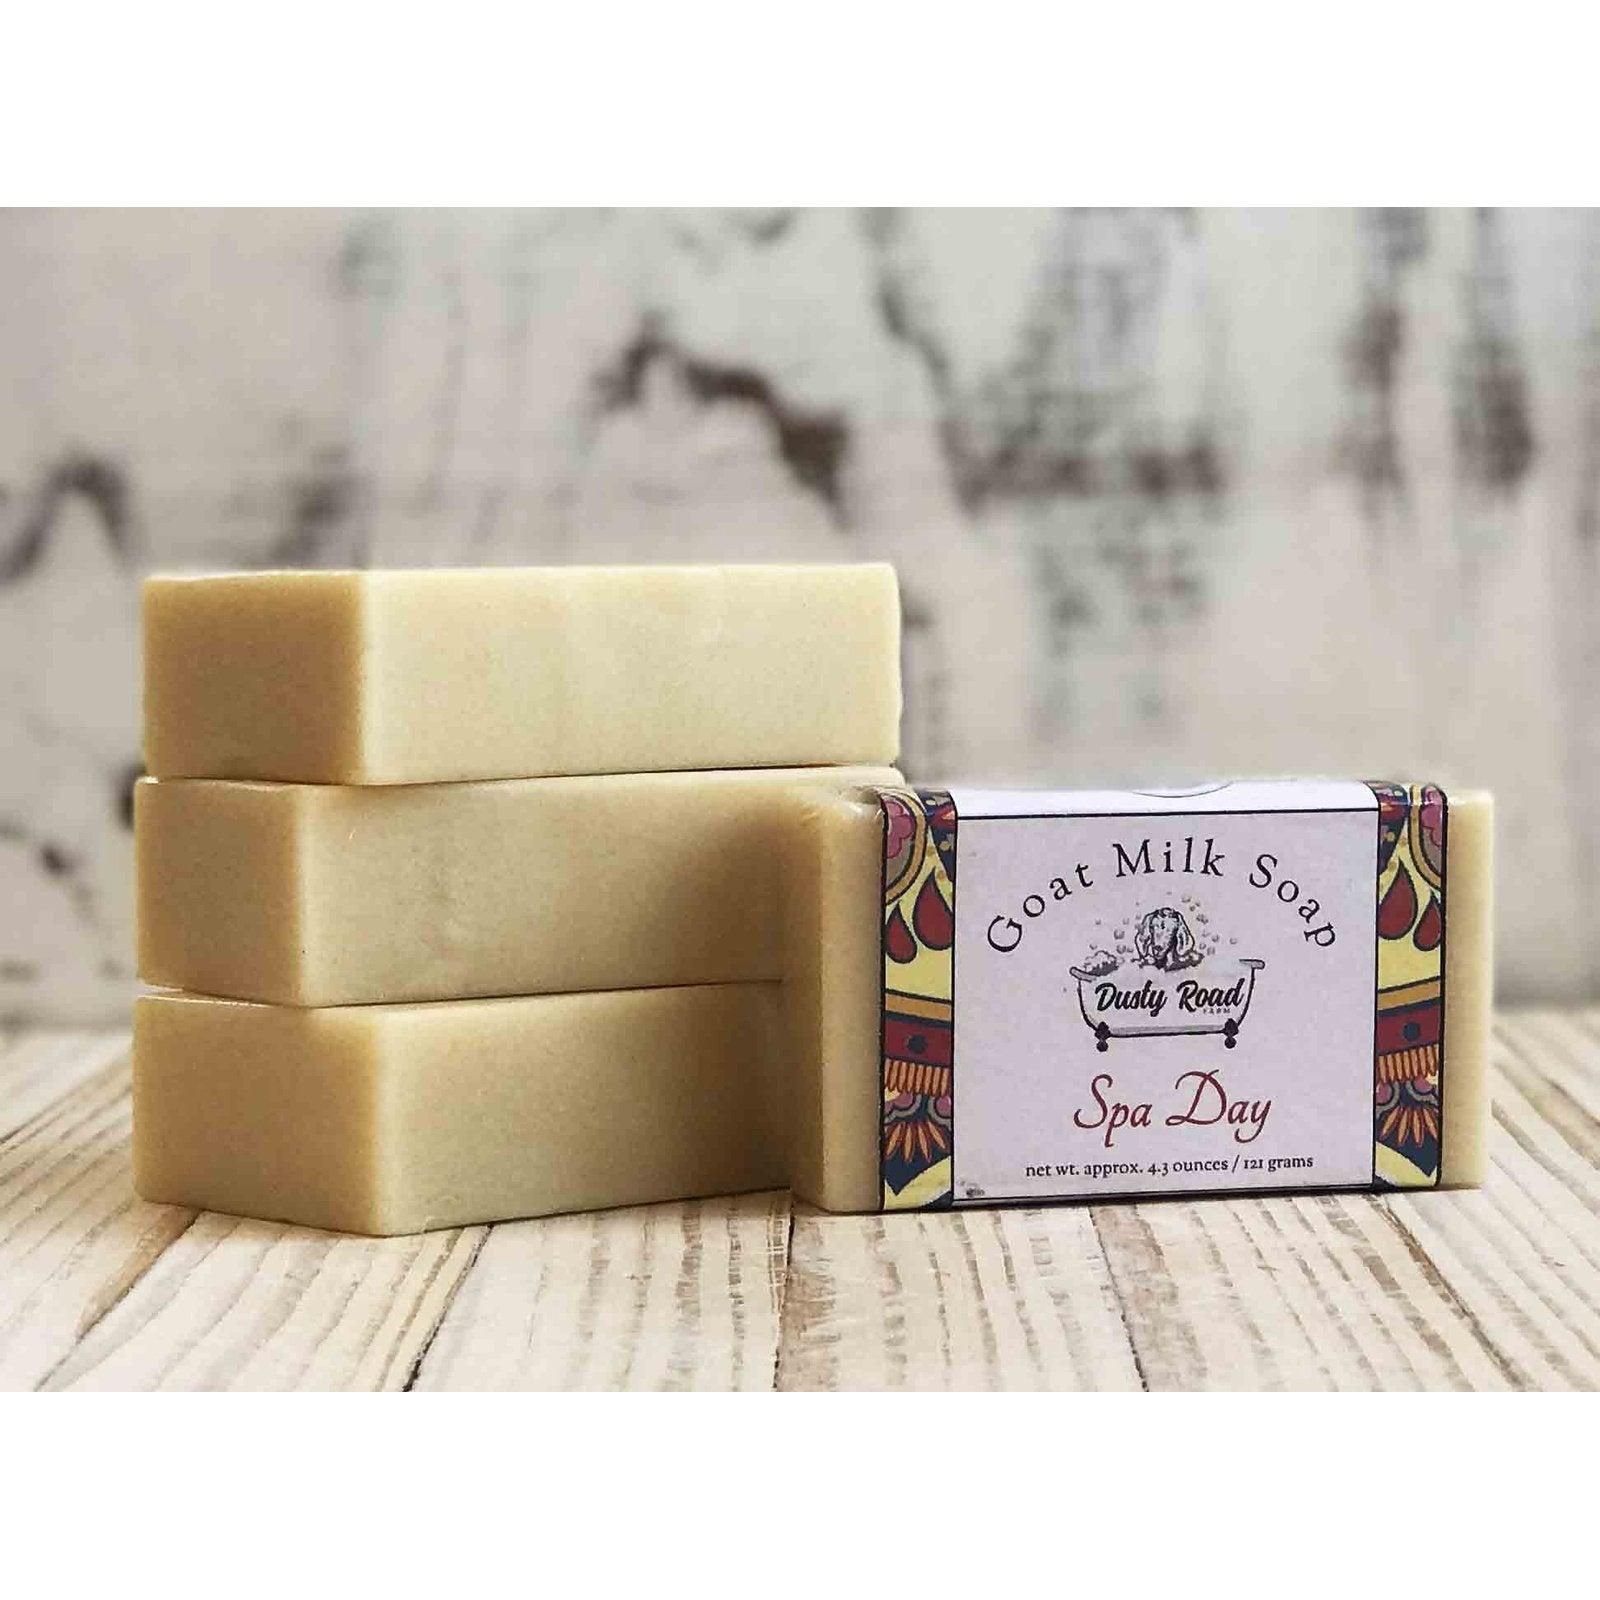 Spa Day All Natural Goat Milk Soap - Dusty Road Farm